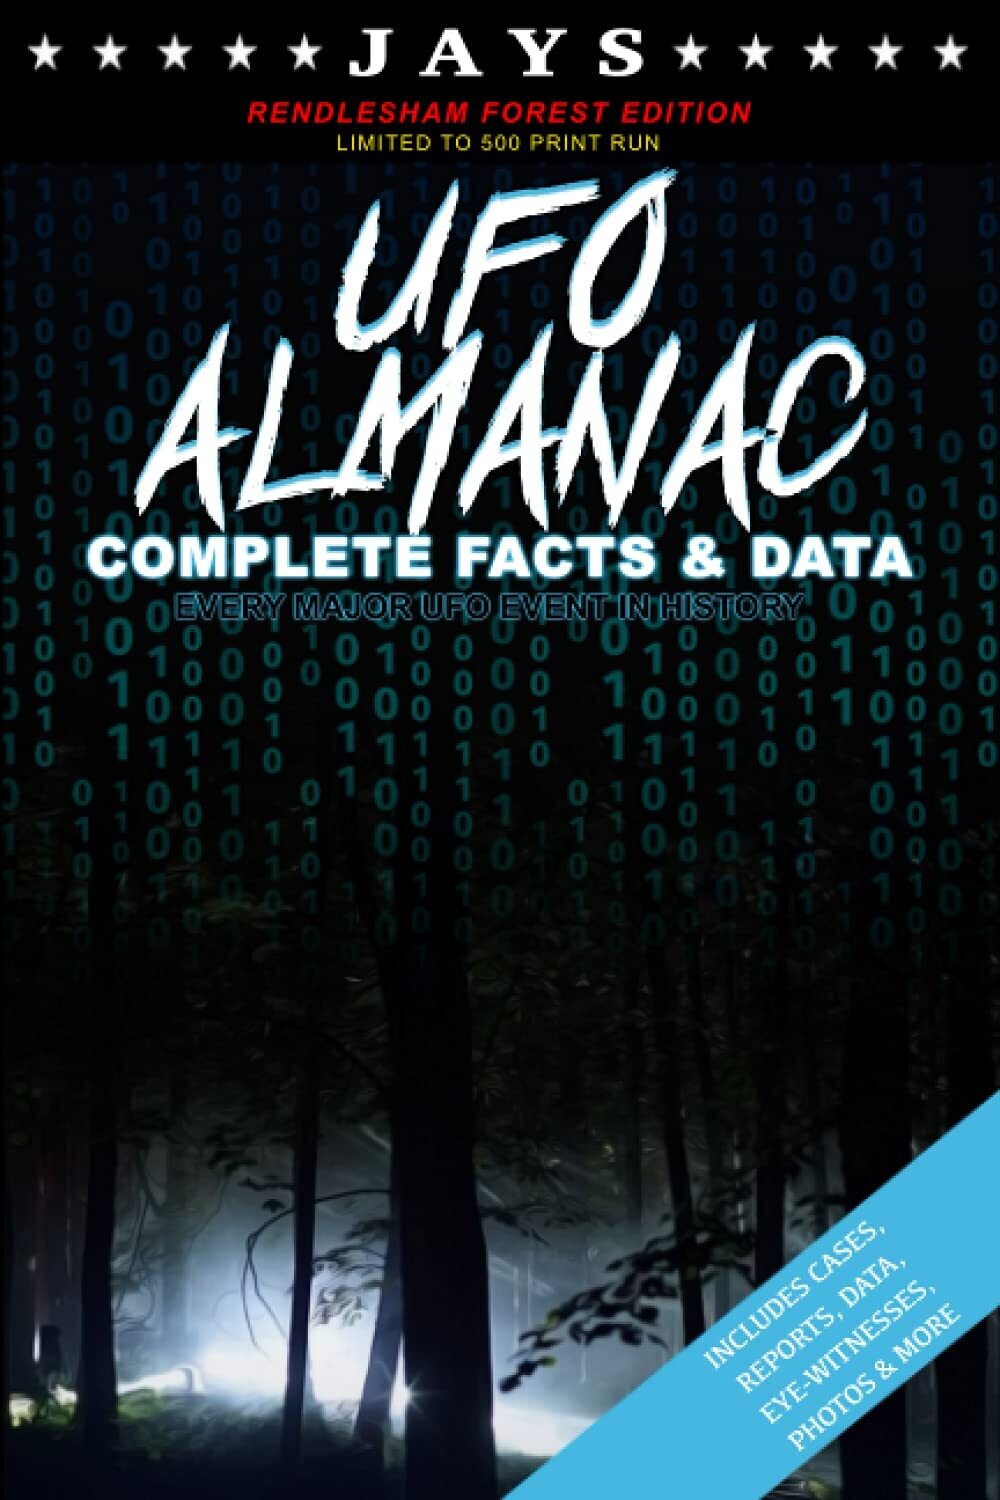 Jays UFO Almanac: Complete Facts & Data - Every Major UFO Case in History Book [RENDLESHAM FOREST EDITION - LIMITED TO 500 PRINT RUN] [Paperback]